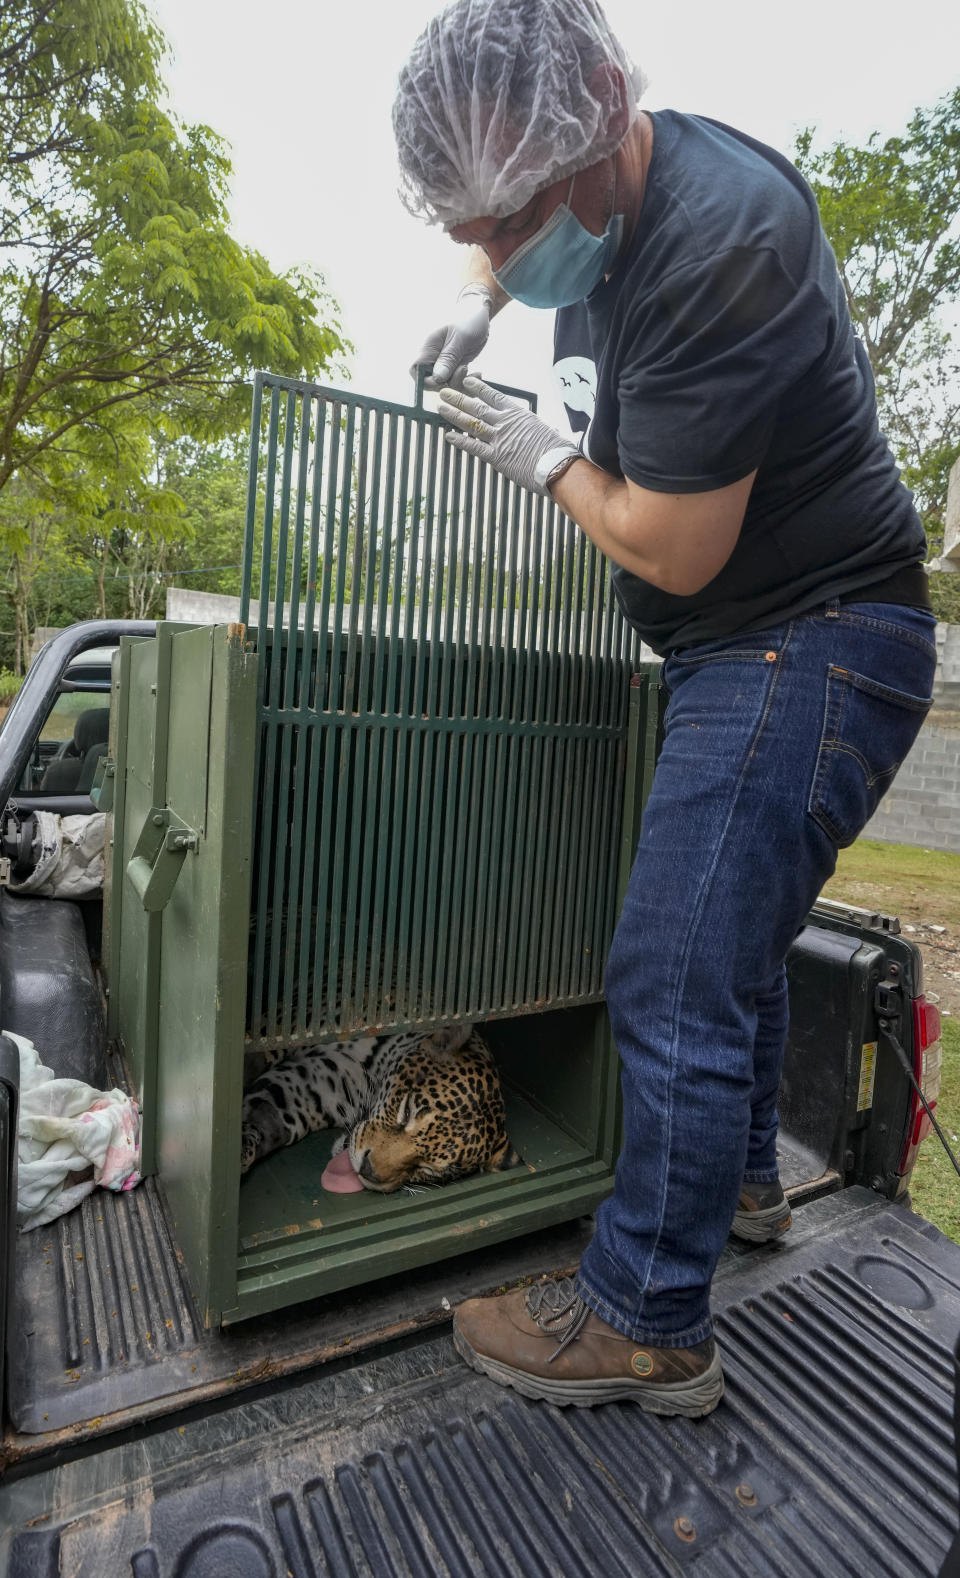 A sedated jaguar is placed in a cage after undergoing an artificial insemination procedure at the Mata Ciliar Association conservation center, in Jundiai, Brazil, Thursday, Oct. 28, 2021. According to the environmental organization, the fertility program intends to develop a reproduction system to be tested on captive jaguars and later bring it to wild felines whose habitats are increasingly under threat from fires and deforestation. (AP Photo/Andre Penner)